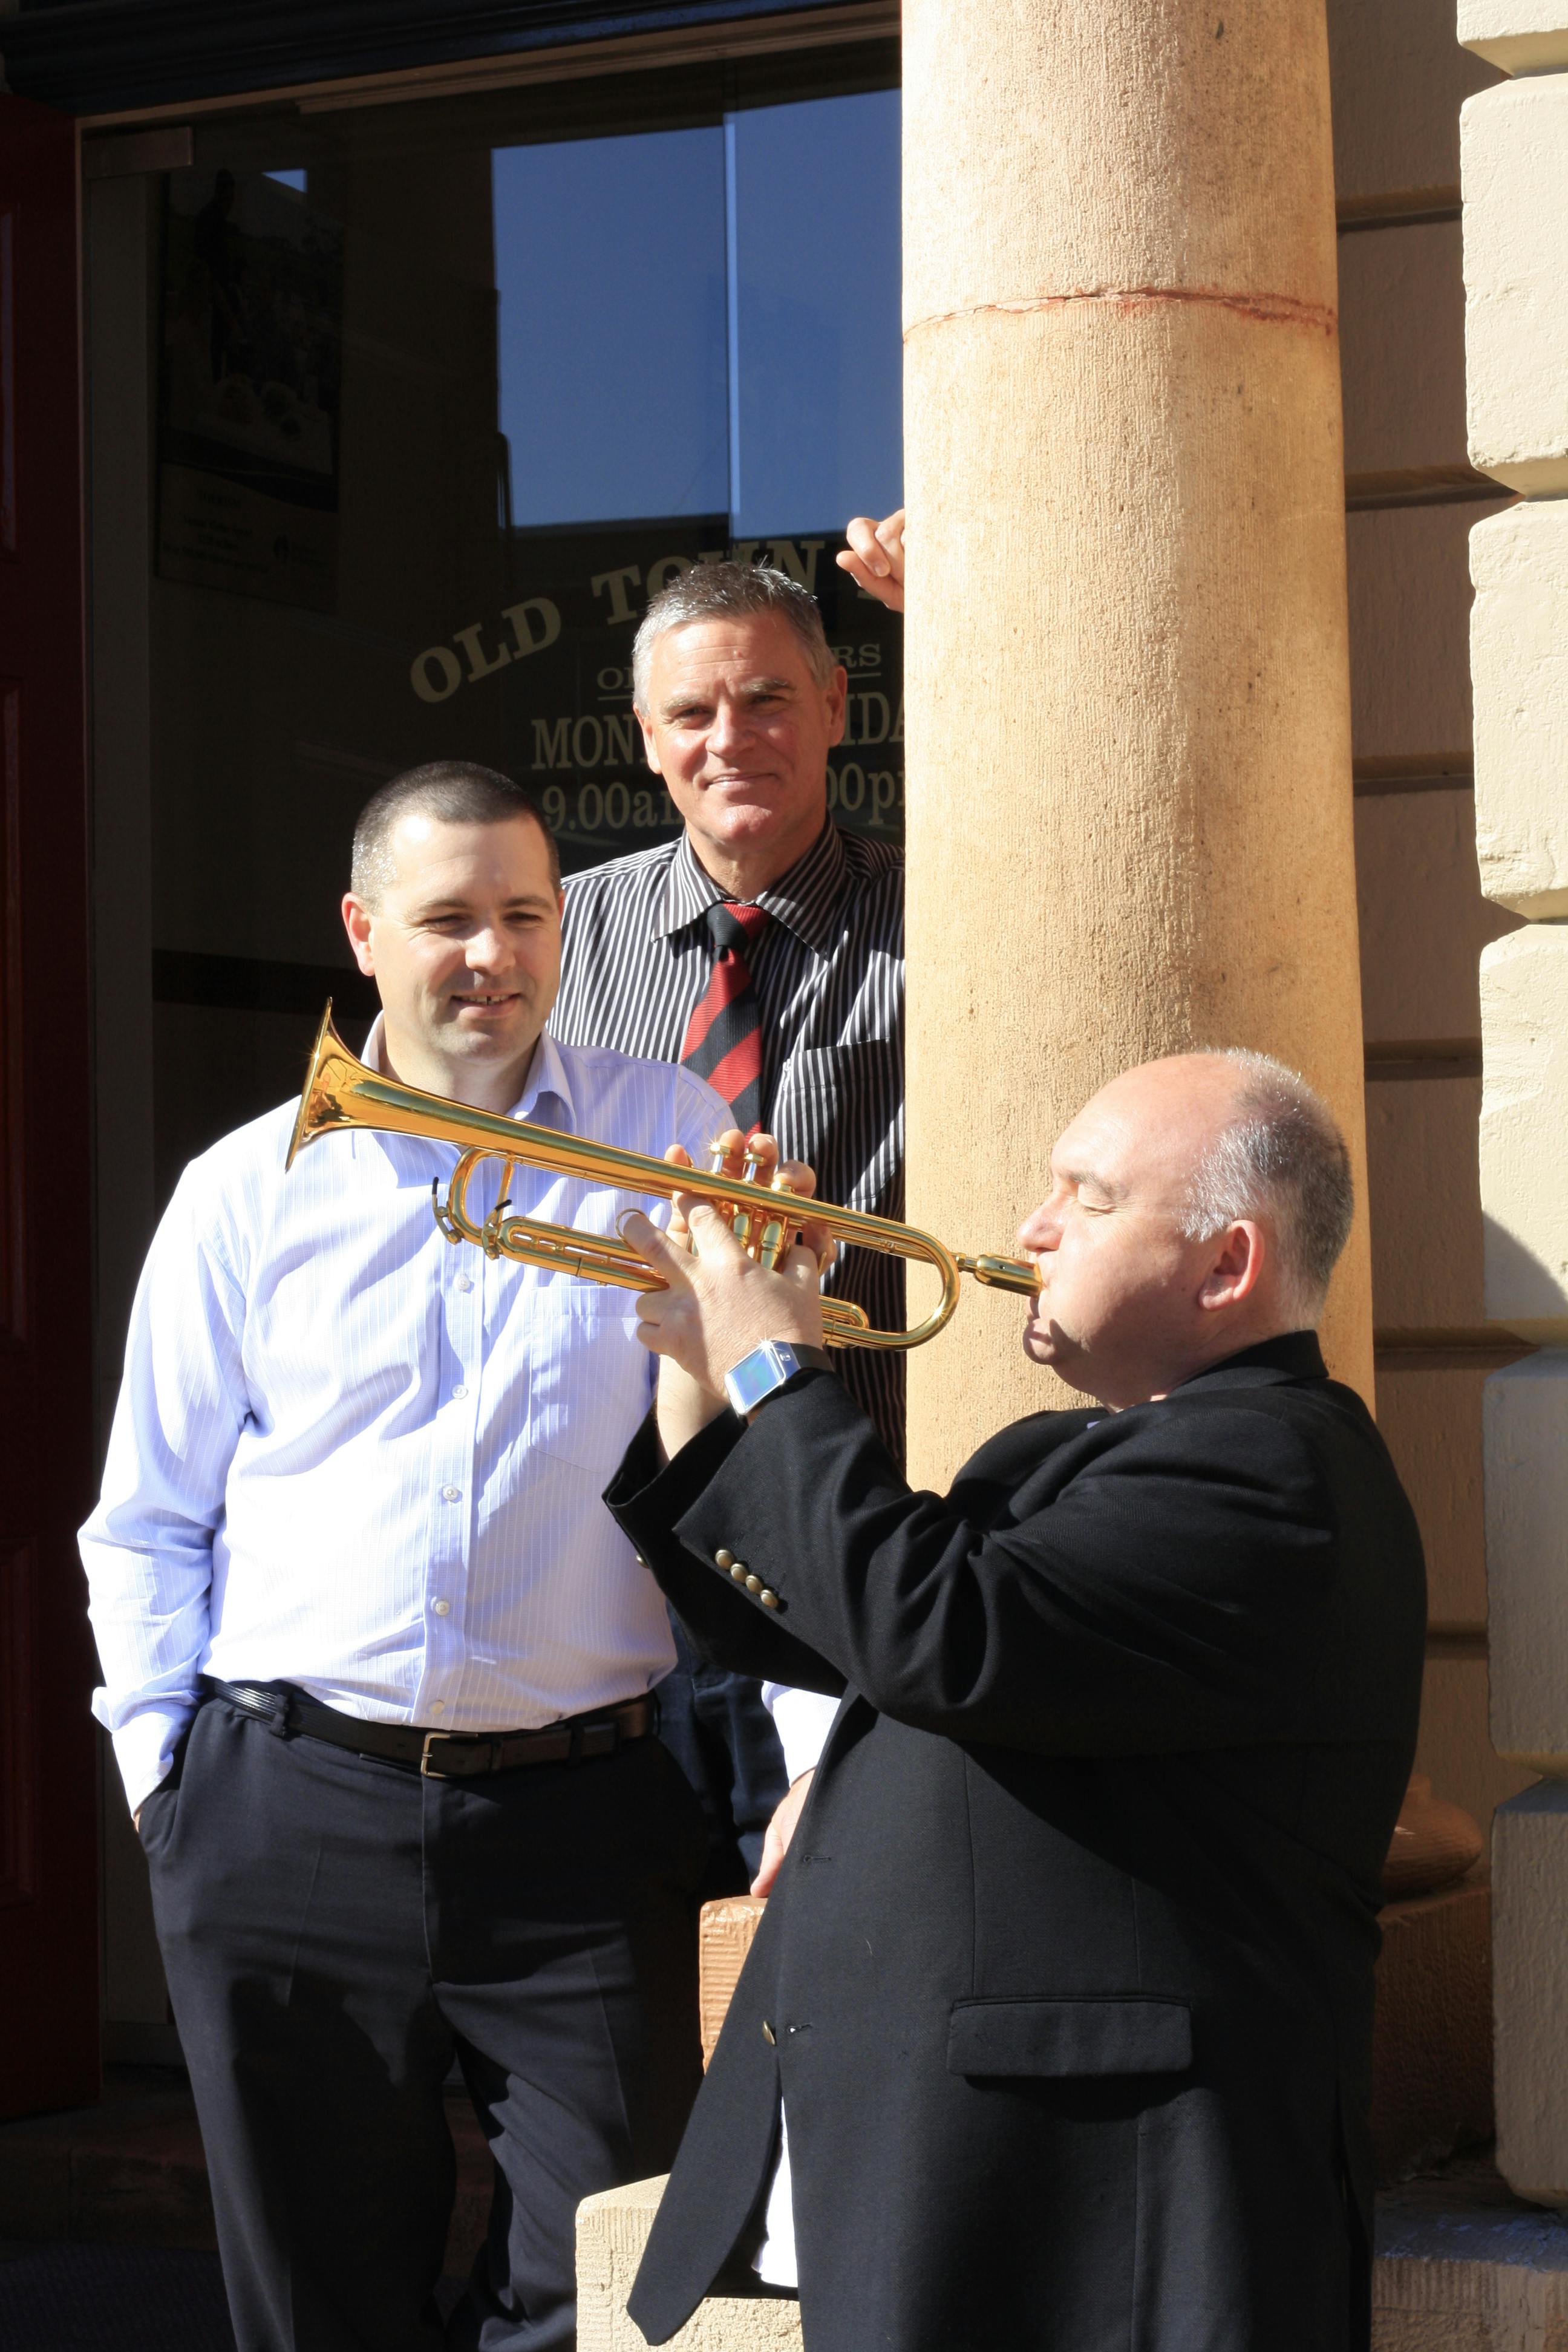 City of Mount Gambier Mayor, Steve Perryman and Chief Executive Officer, Mark McShane with James Morrison at the doors of the Old Town Hall. Photo Credit: The Border Watch